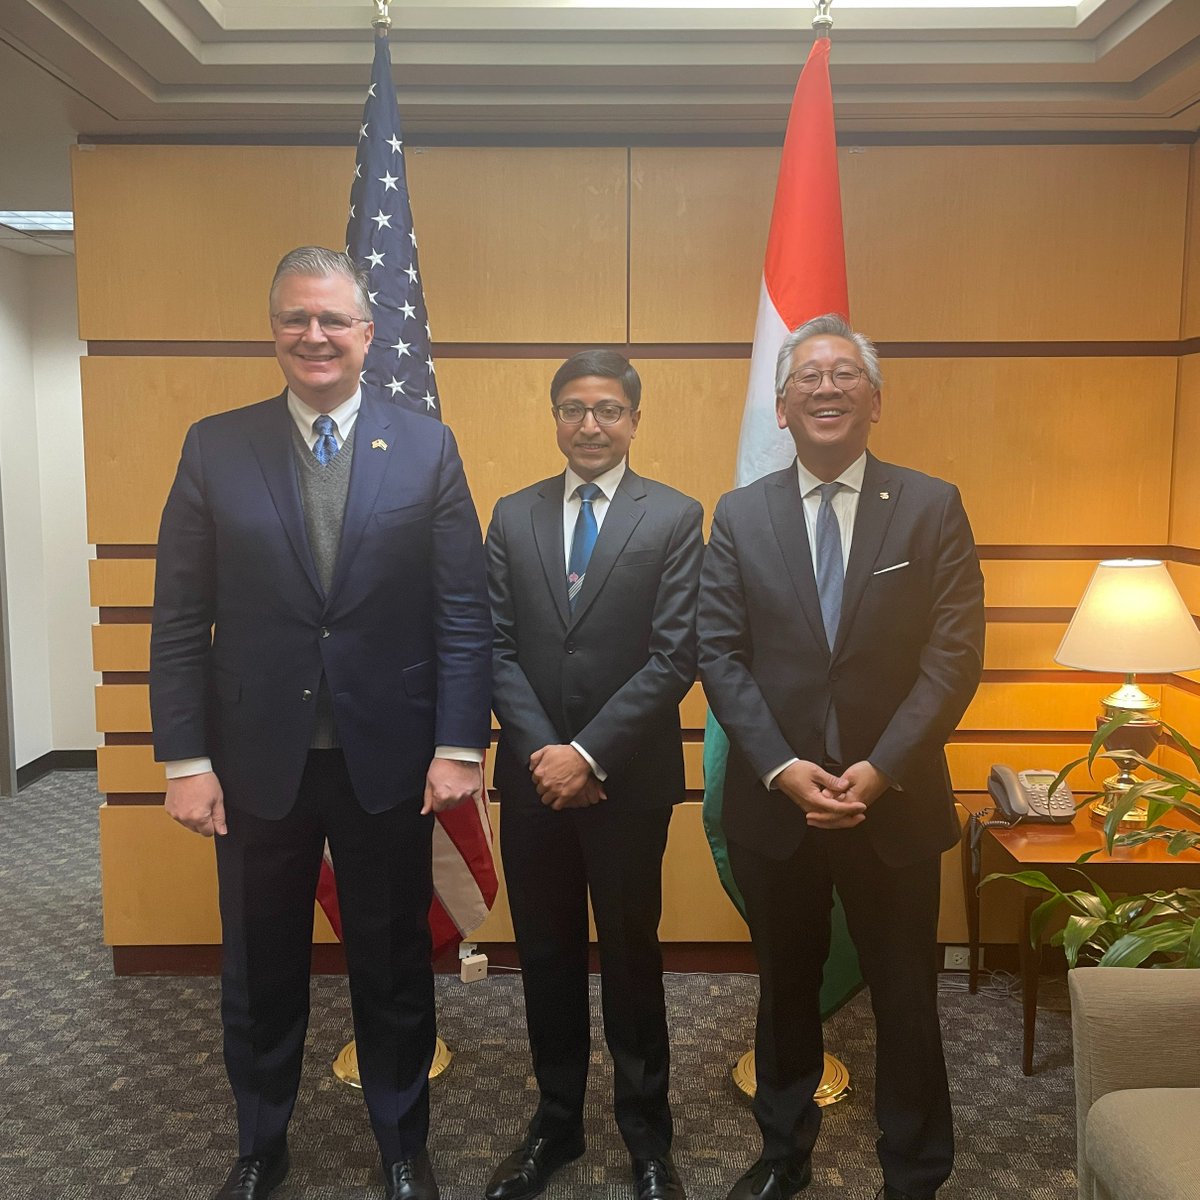 .@State_SCA Assistant Secretary Lu and I were delighted to host @MEAIndia’s Joint Secretary Das for the #USIndia East Asia Consultations. Appreciate our close cooperation to support a free and open Indo-Pacific. -DJK